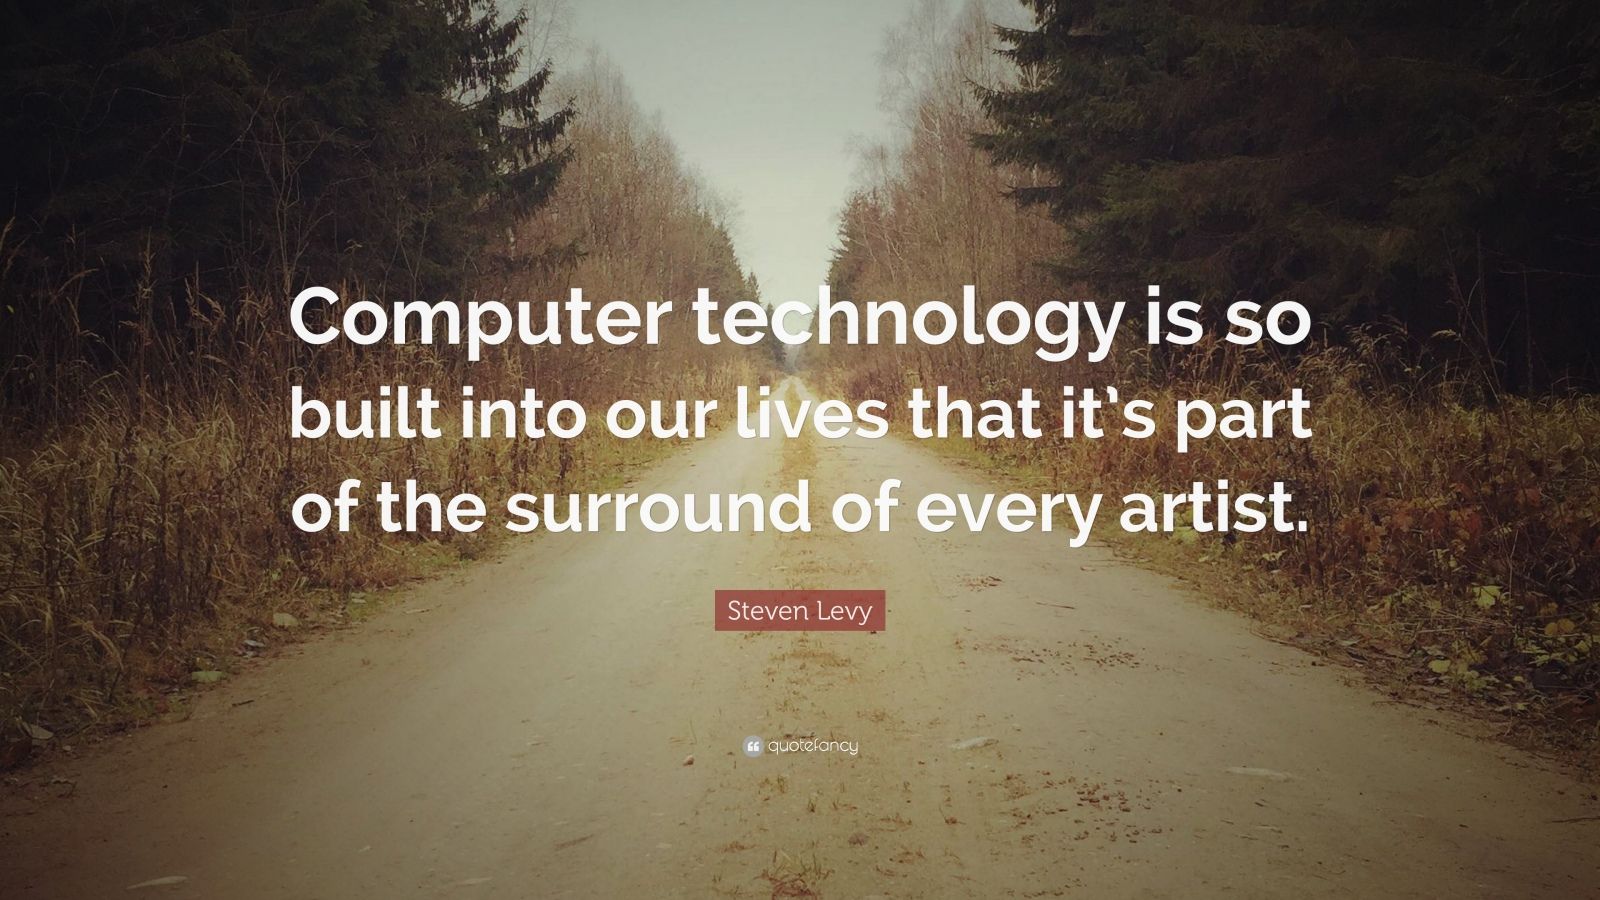 Steven Levy Quote: “Computer technology is so built into our lives that ...